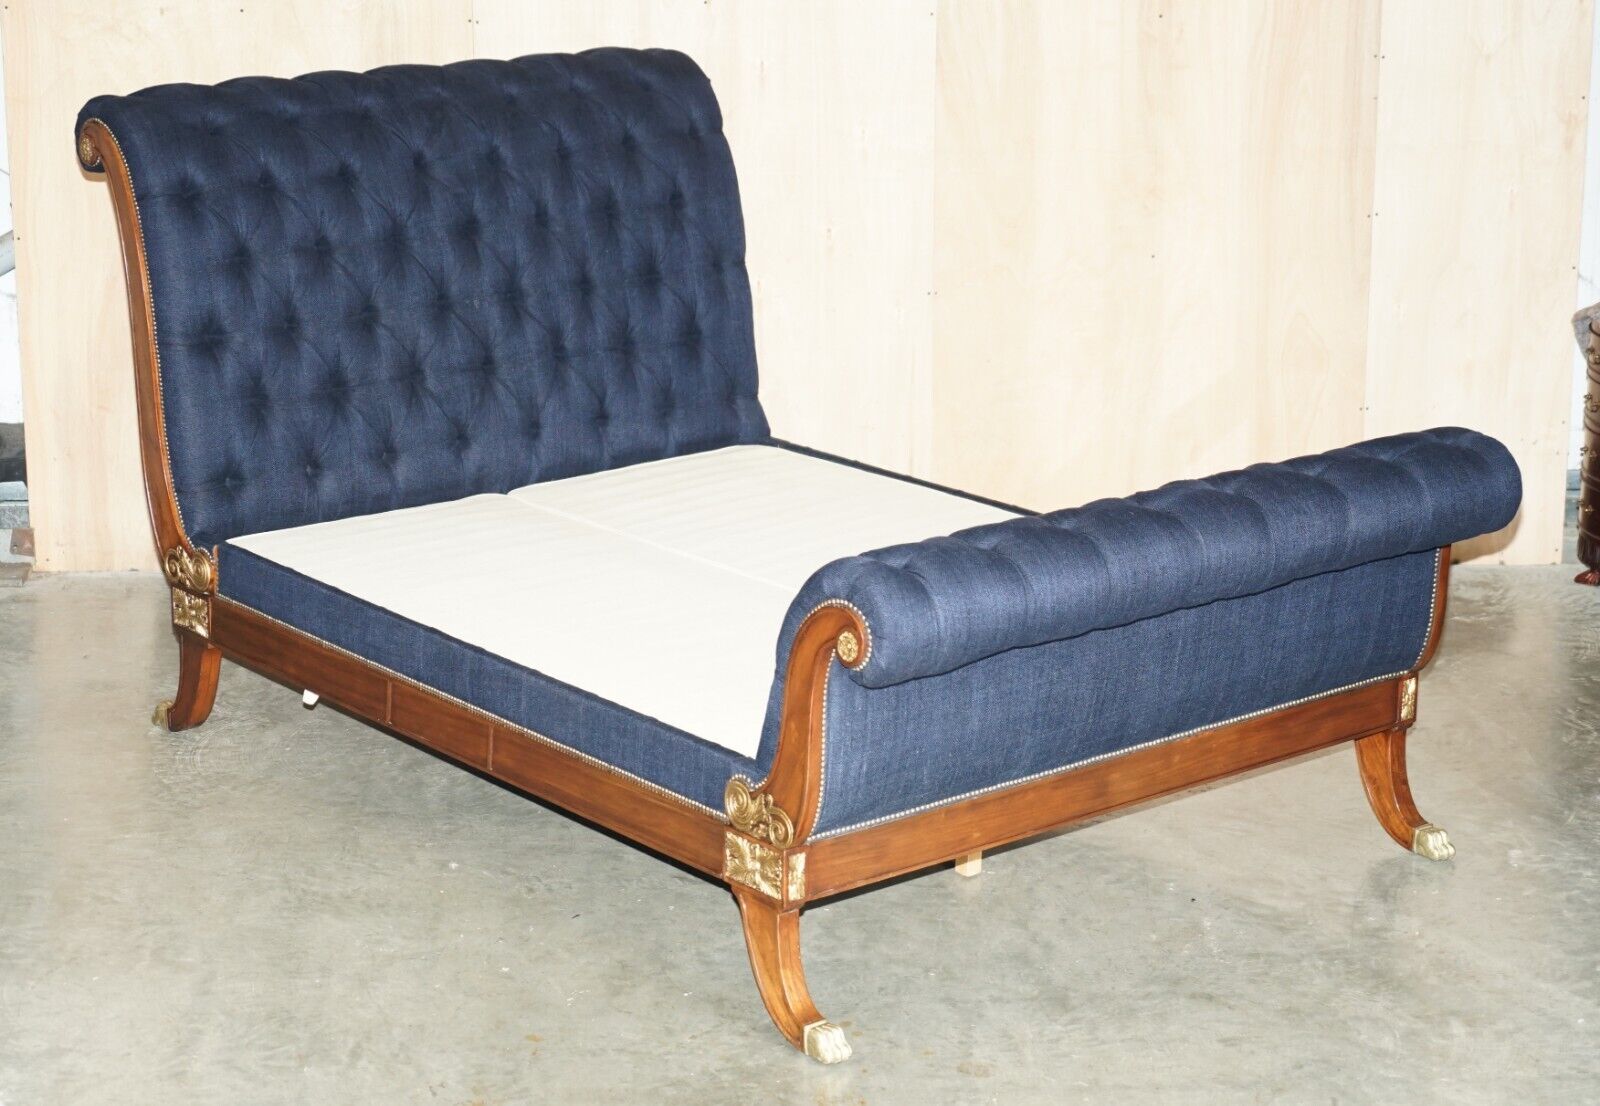 EXQUISITE LIMITED EDITION RALPH LAUREN RUE ROYALE CHESTERFIELD TUFTED SLEIGH BED